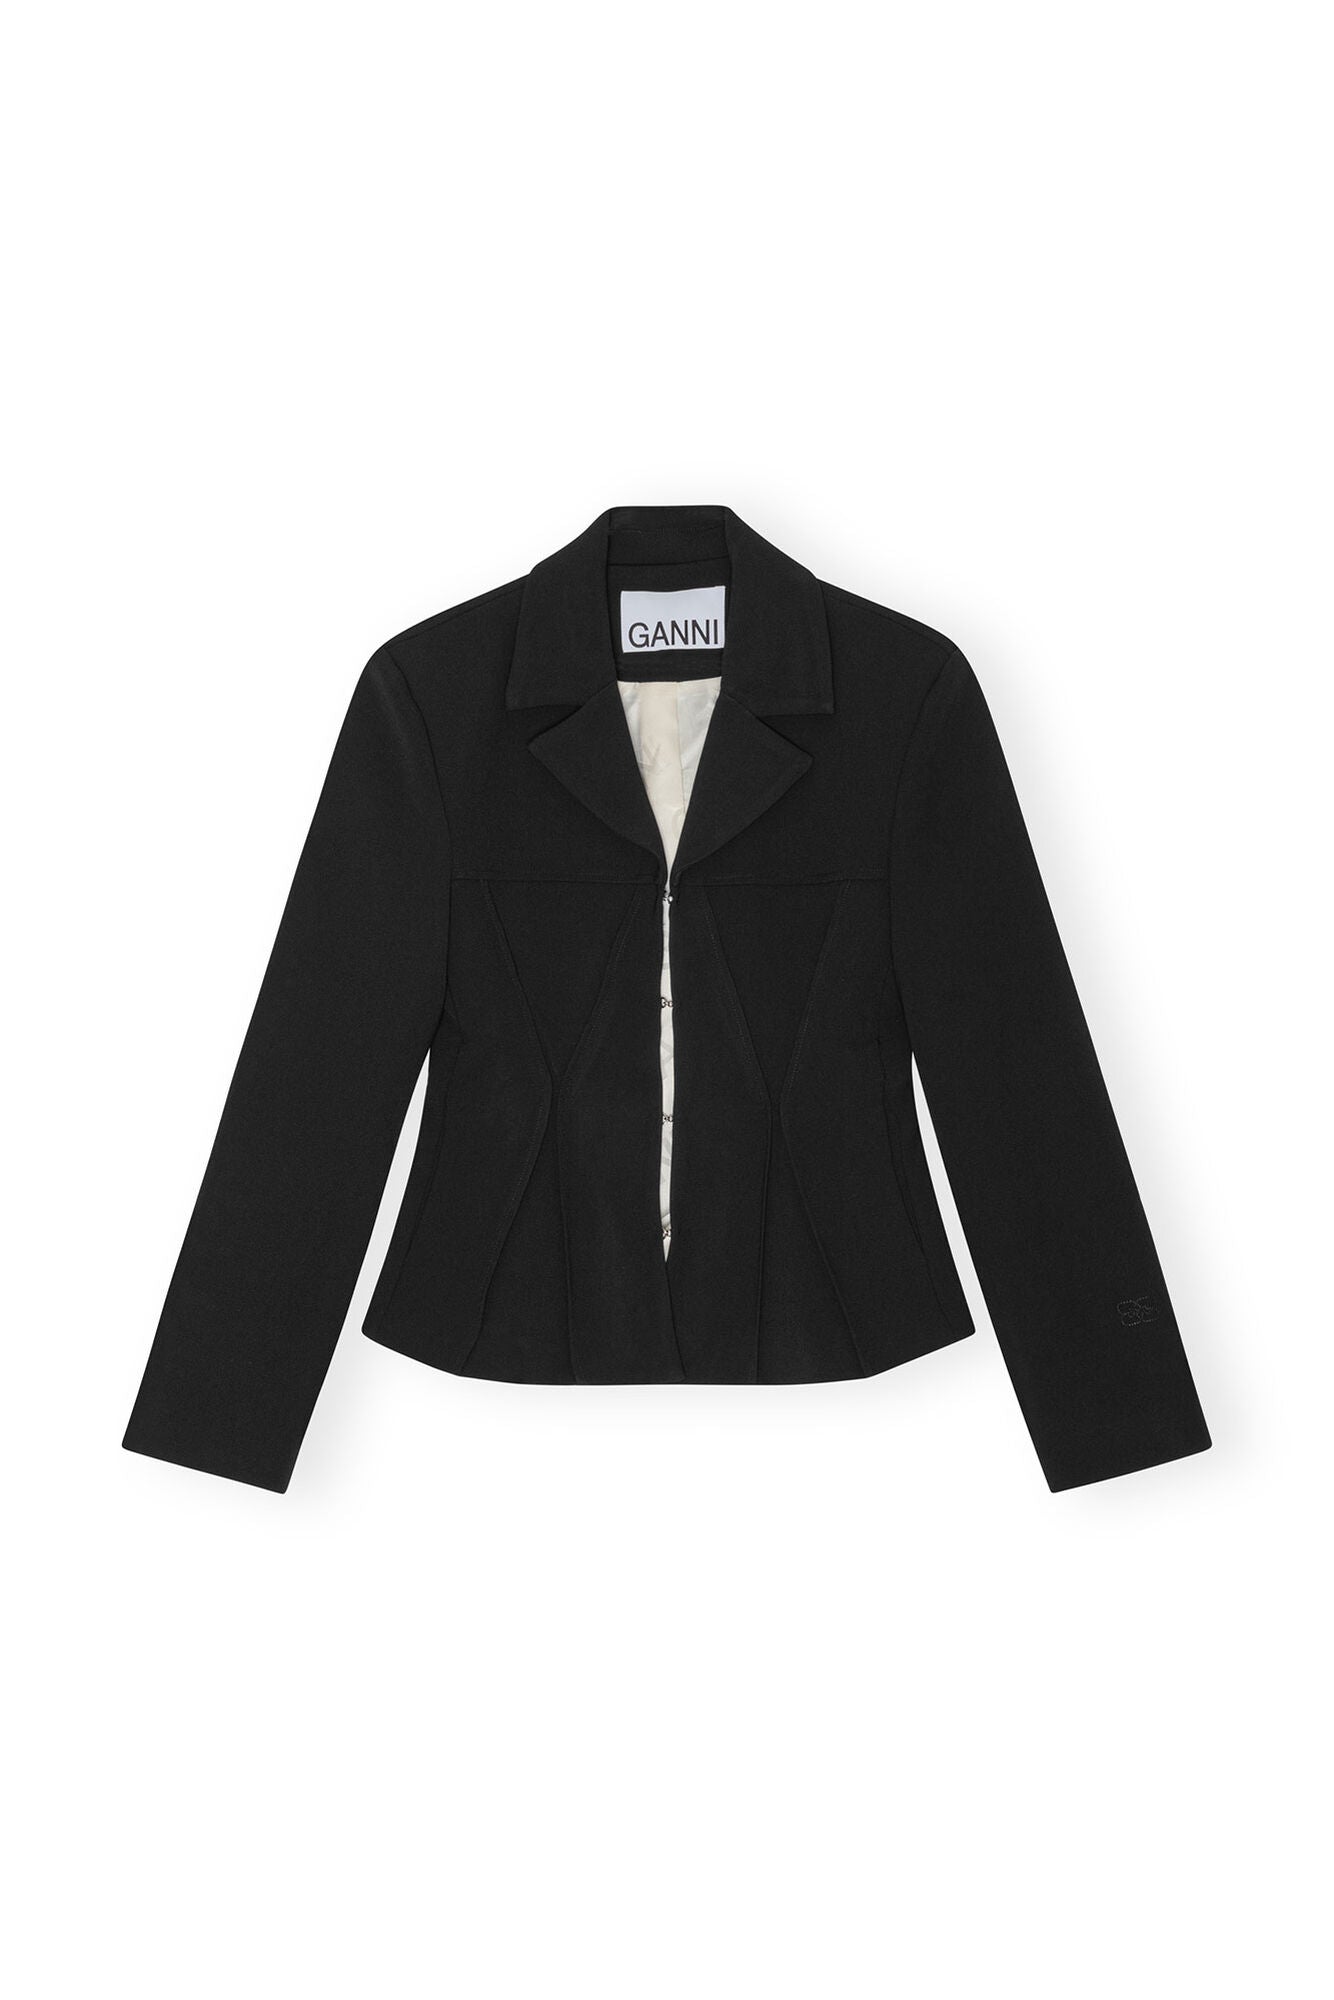 BONDED CREPE FITTED BLAZER IN BLACK - Romi Boutique